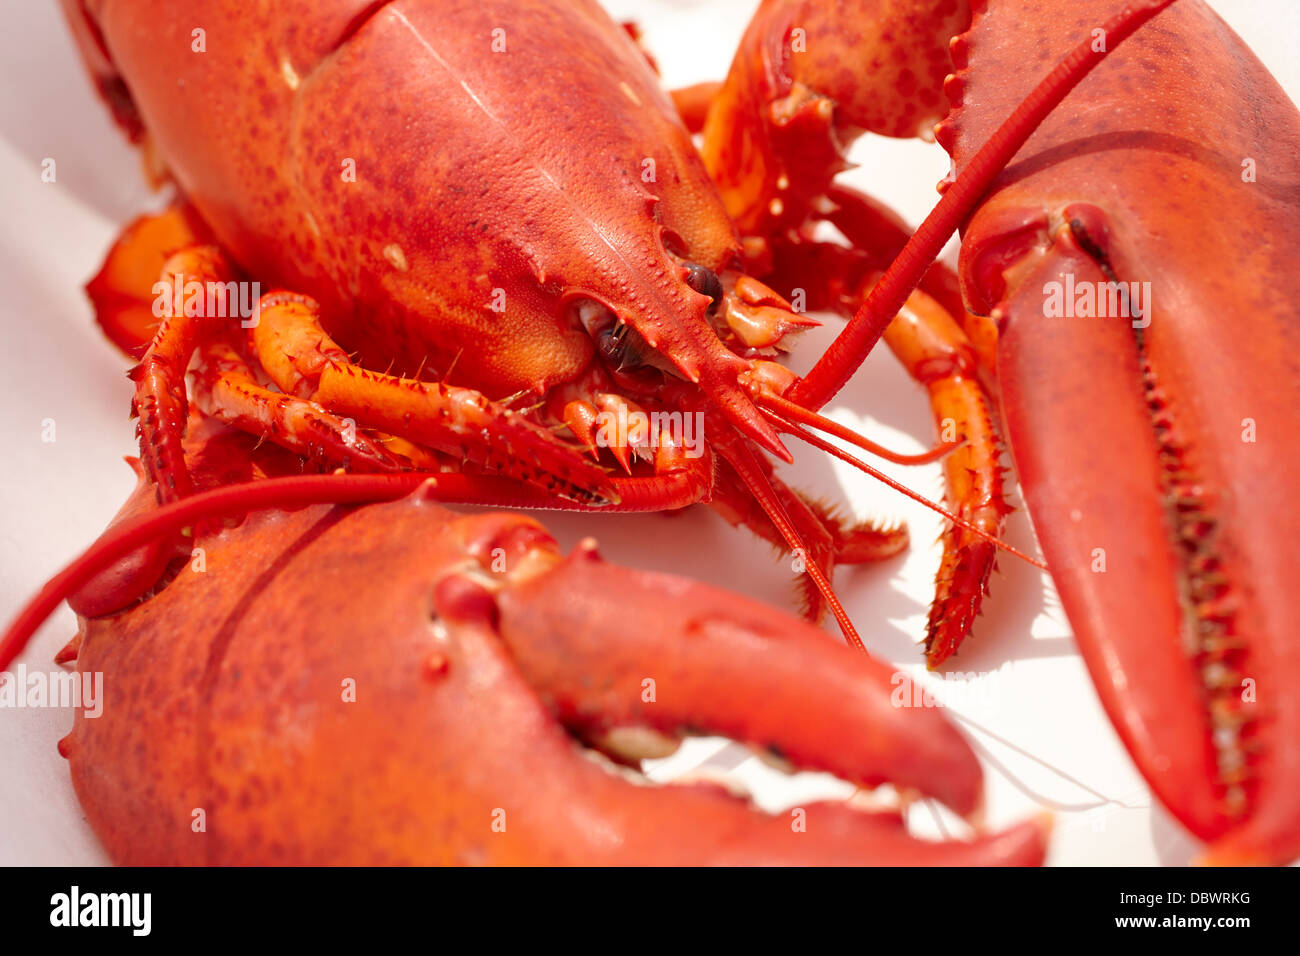 A cooked Maine lobster, ready to eat Stock Photo